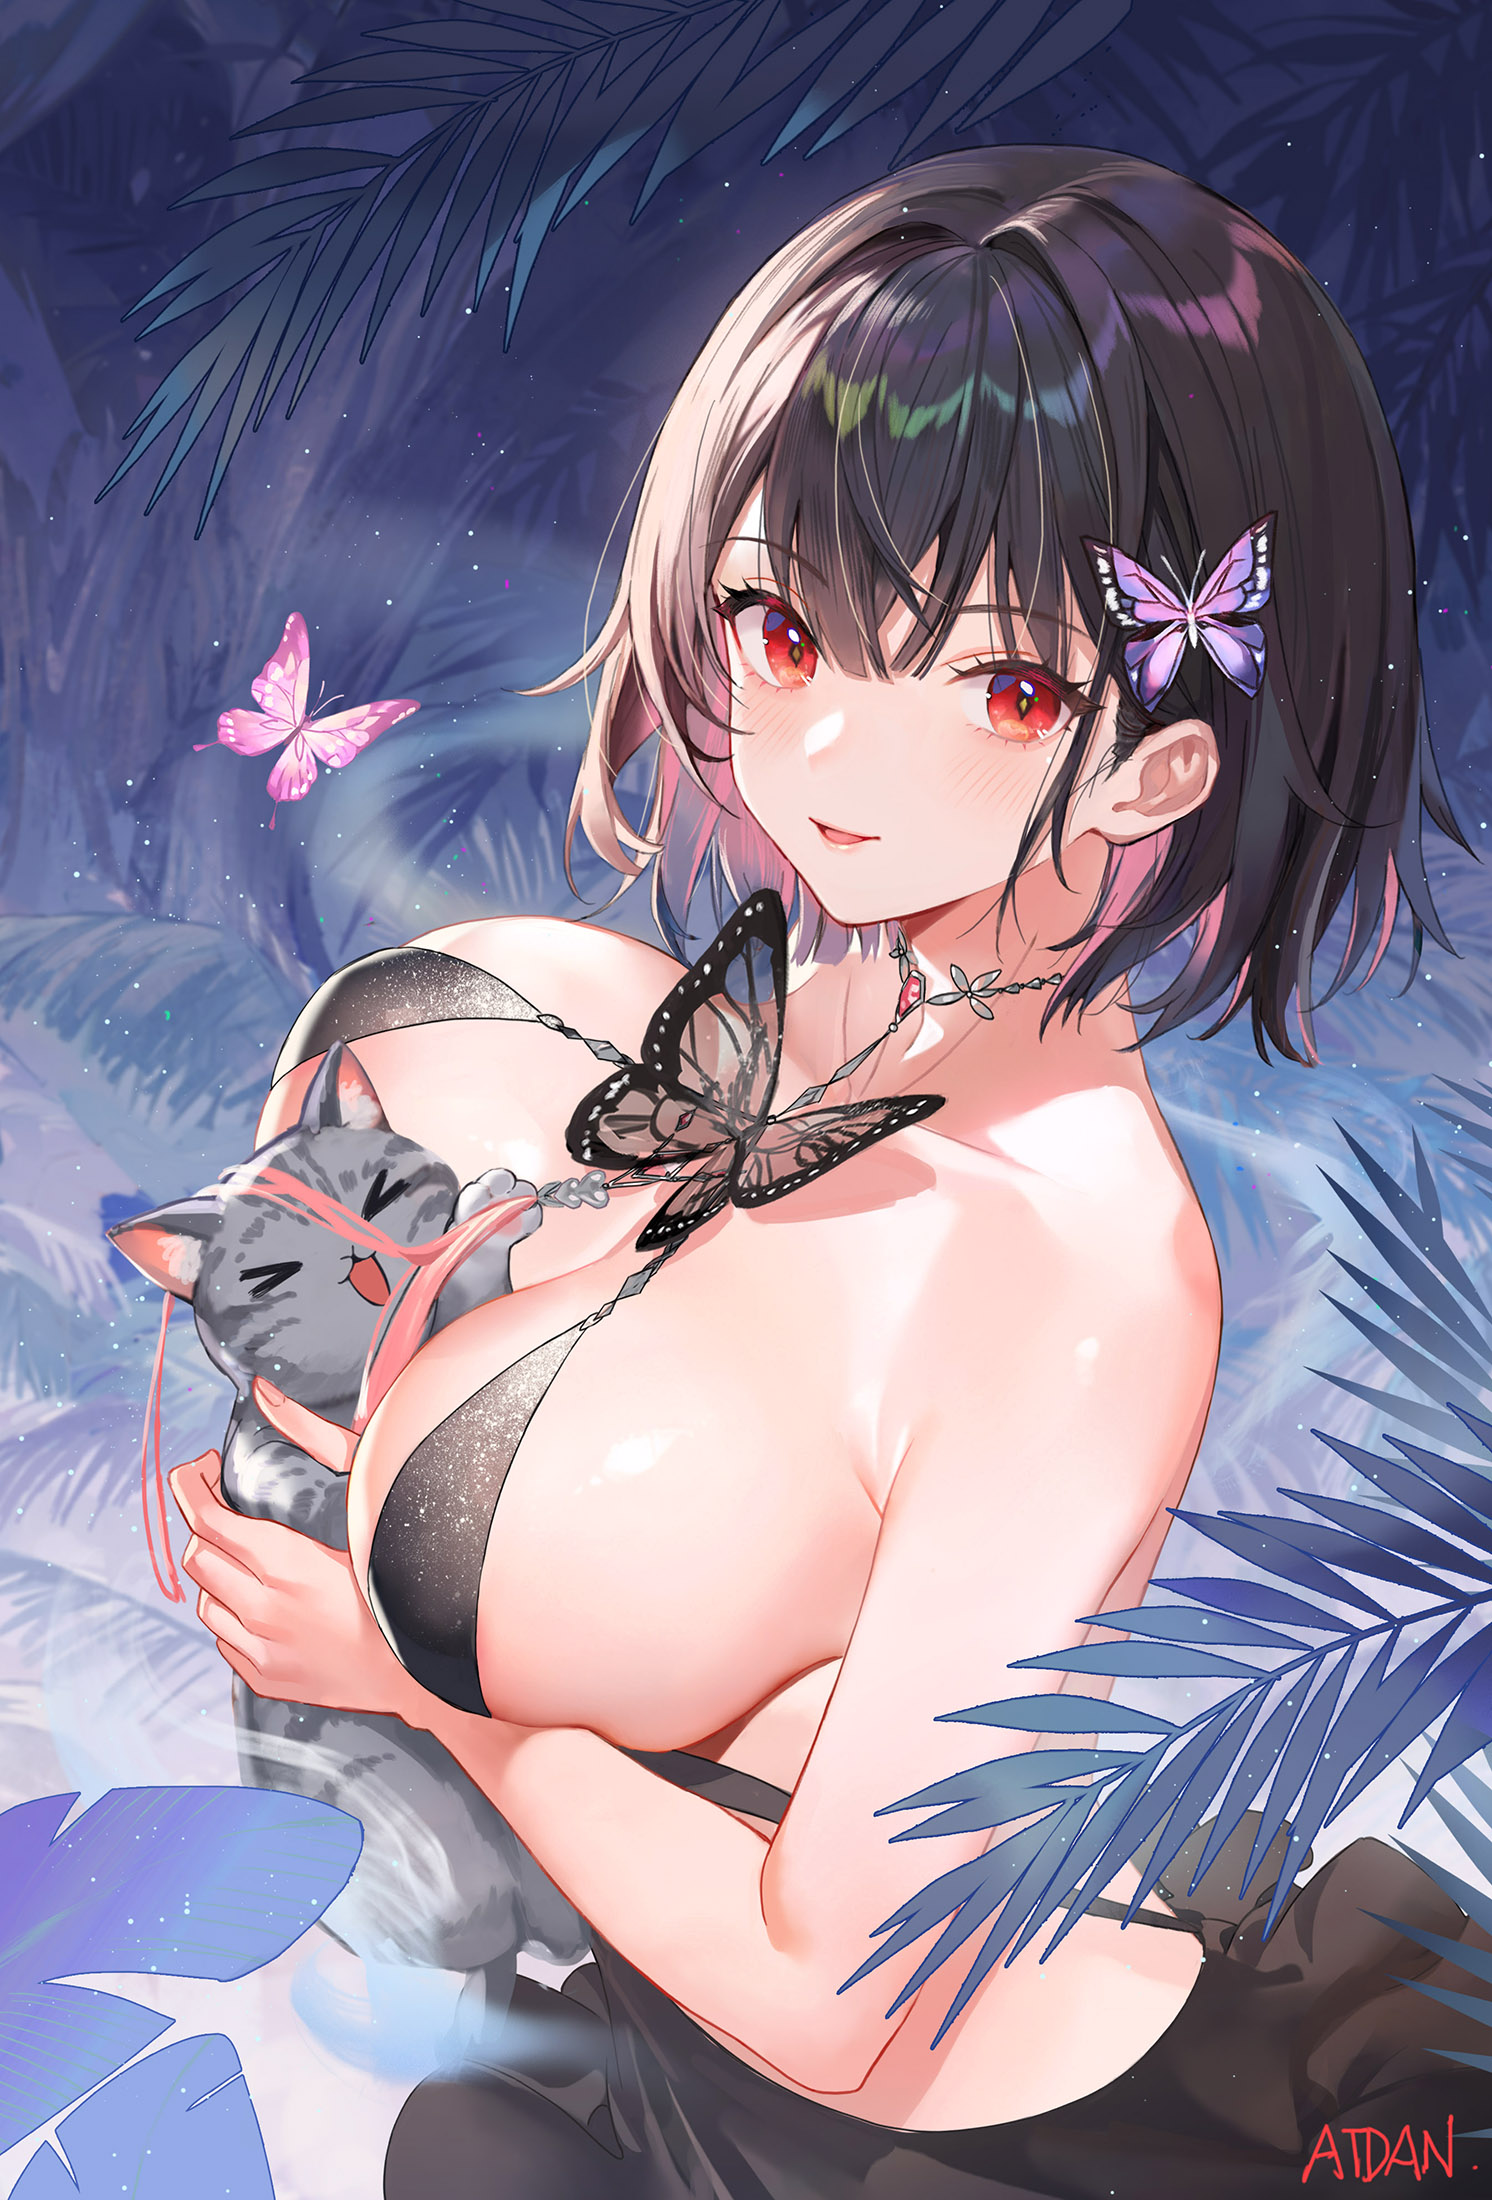 Original Characters Pet Atdan Portrait Display Cats Anime Girls Short Hair Leaves Butterfly Looking  1492x2200